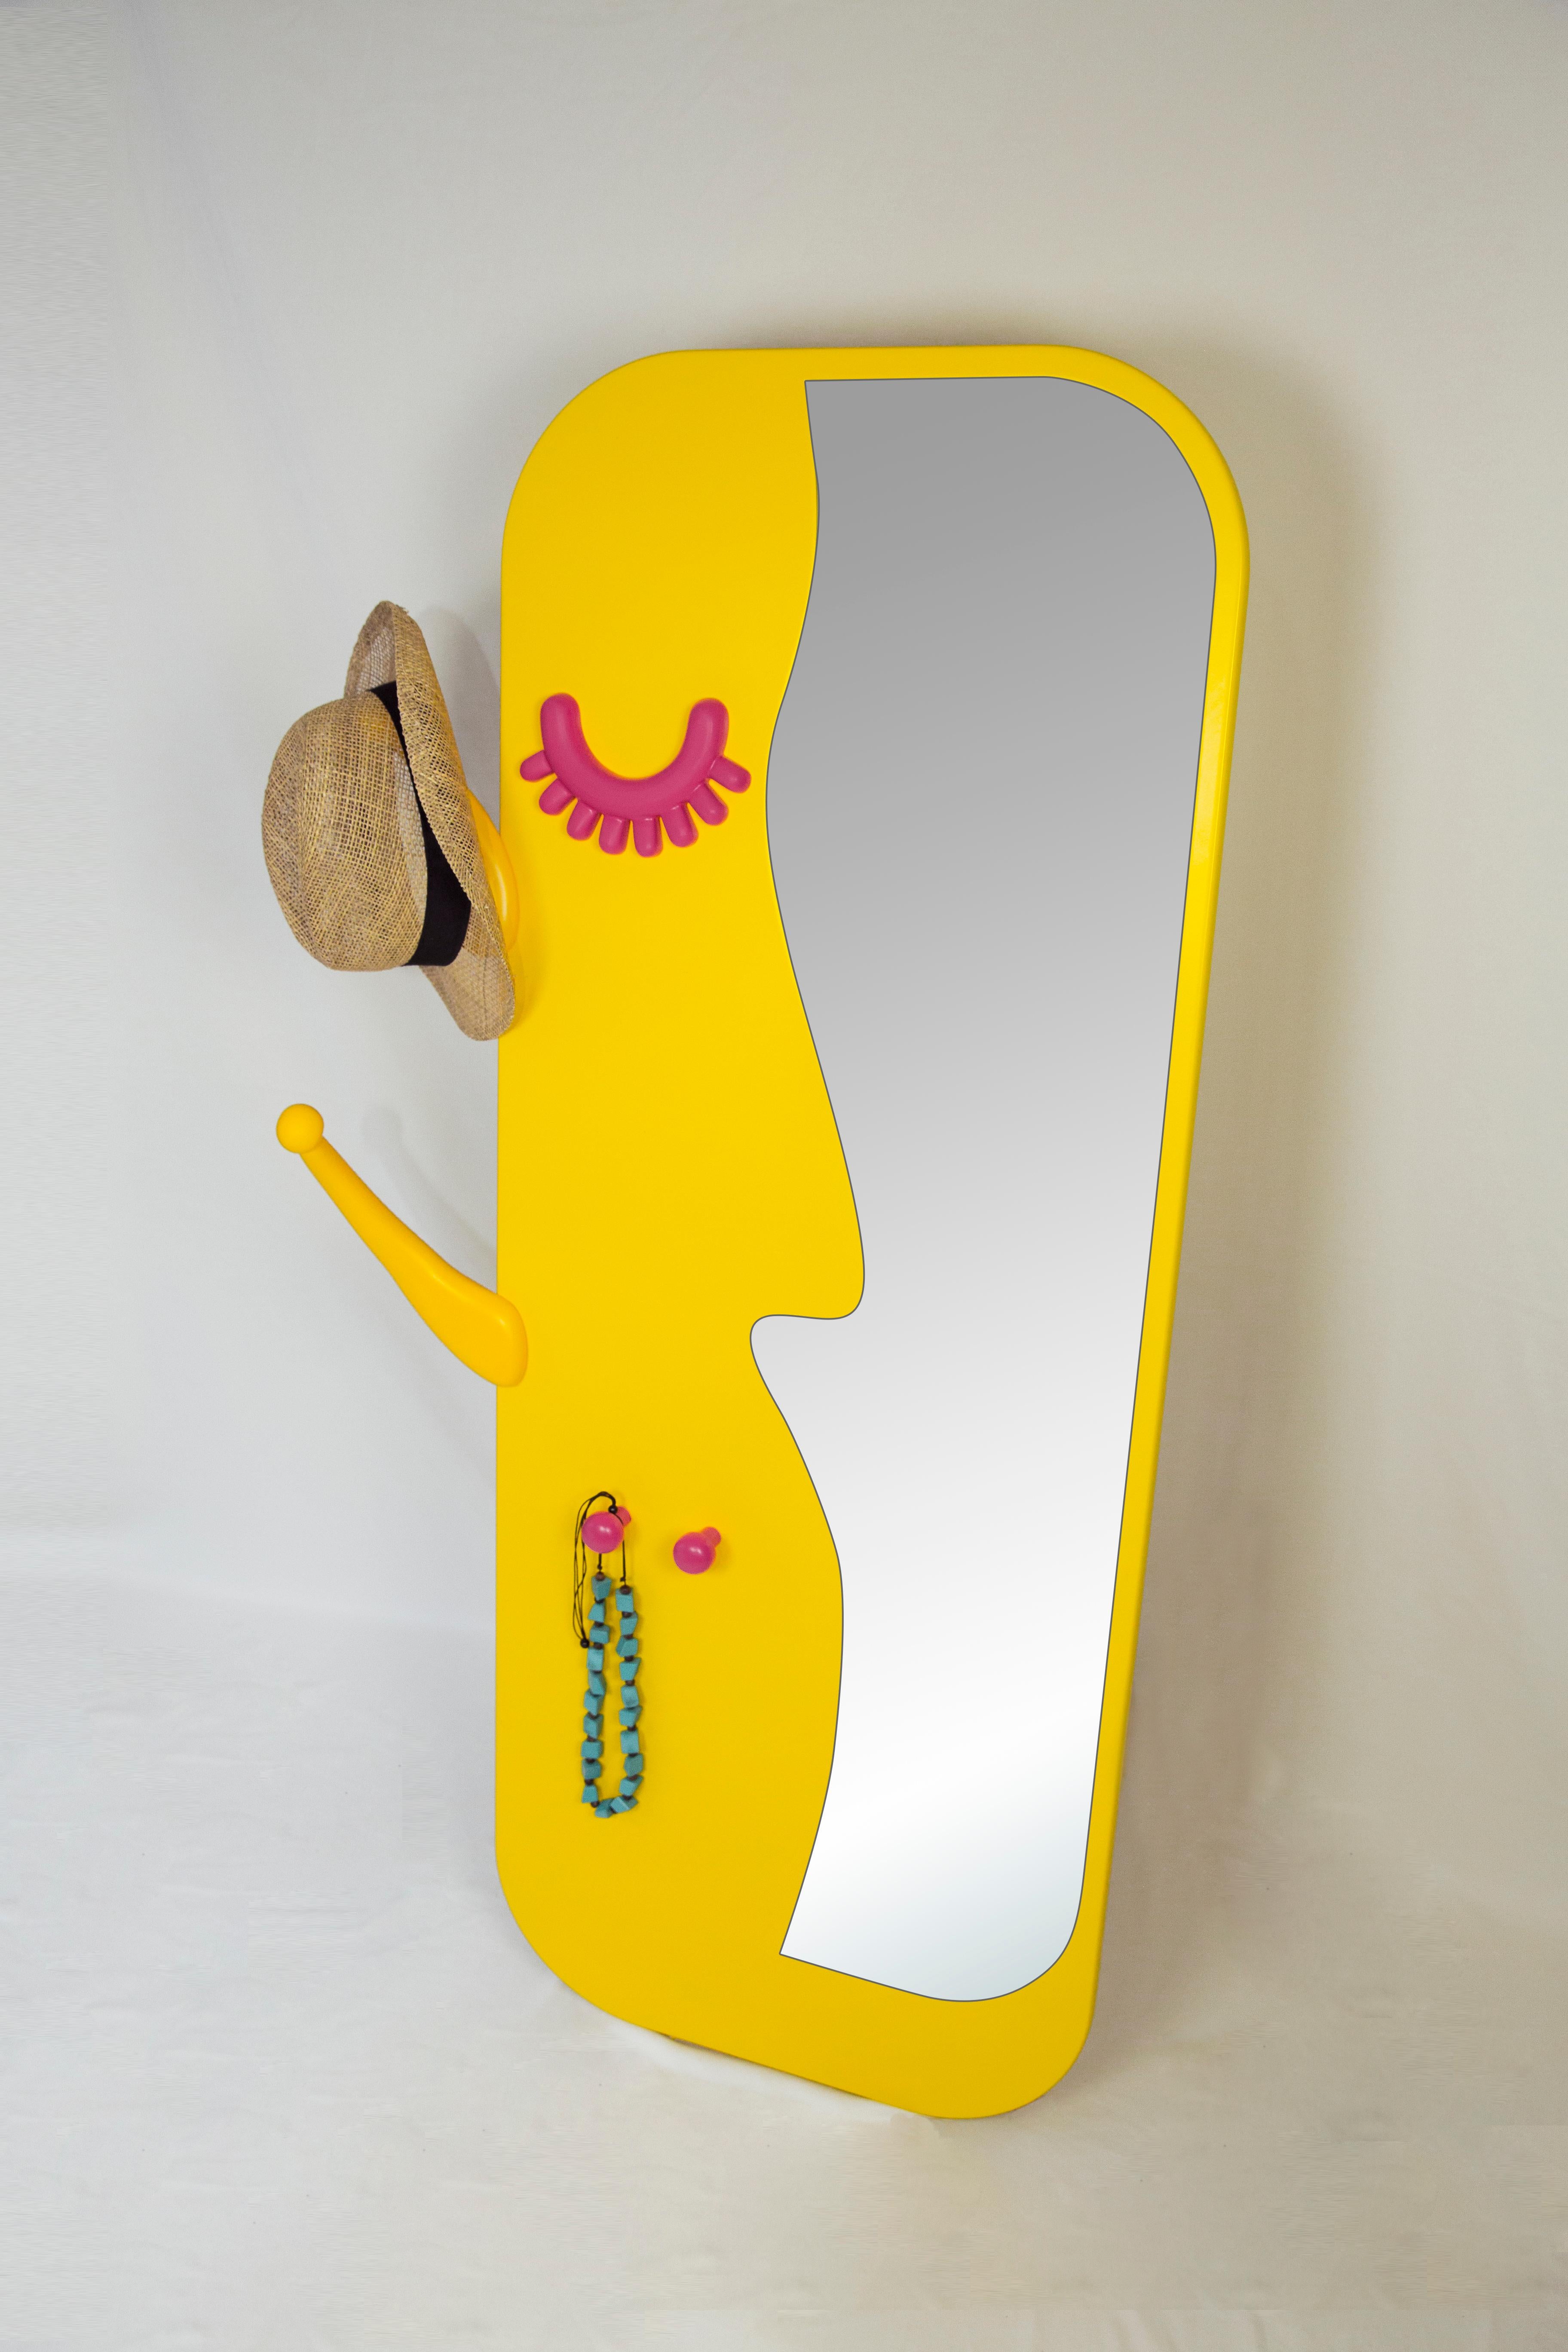 Face to Face dressing mirror and hanger

The hanger that helps you get dressed was combined with the mirror that shows your best self; a fun design that will make you smile.

Production method and material

The body is painted with lacquer paint by